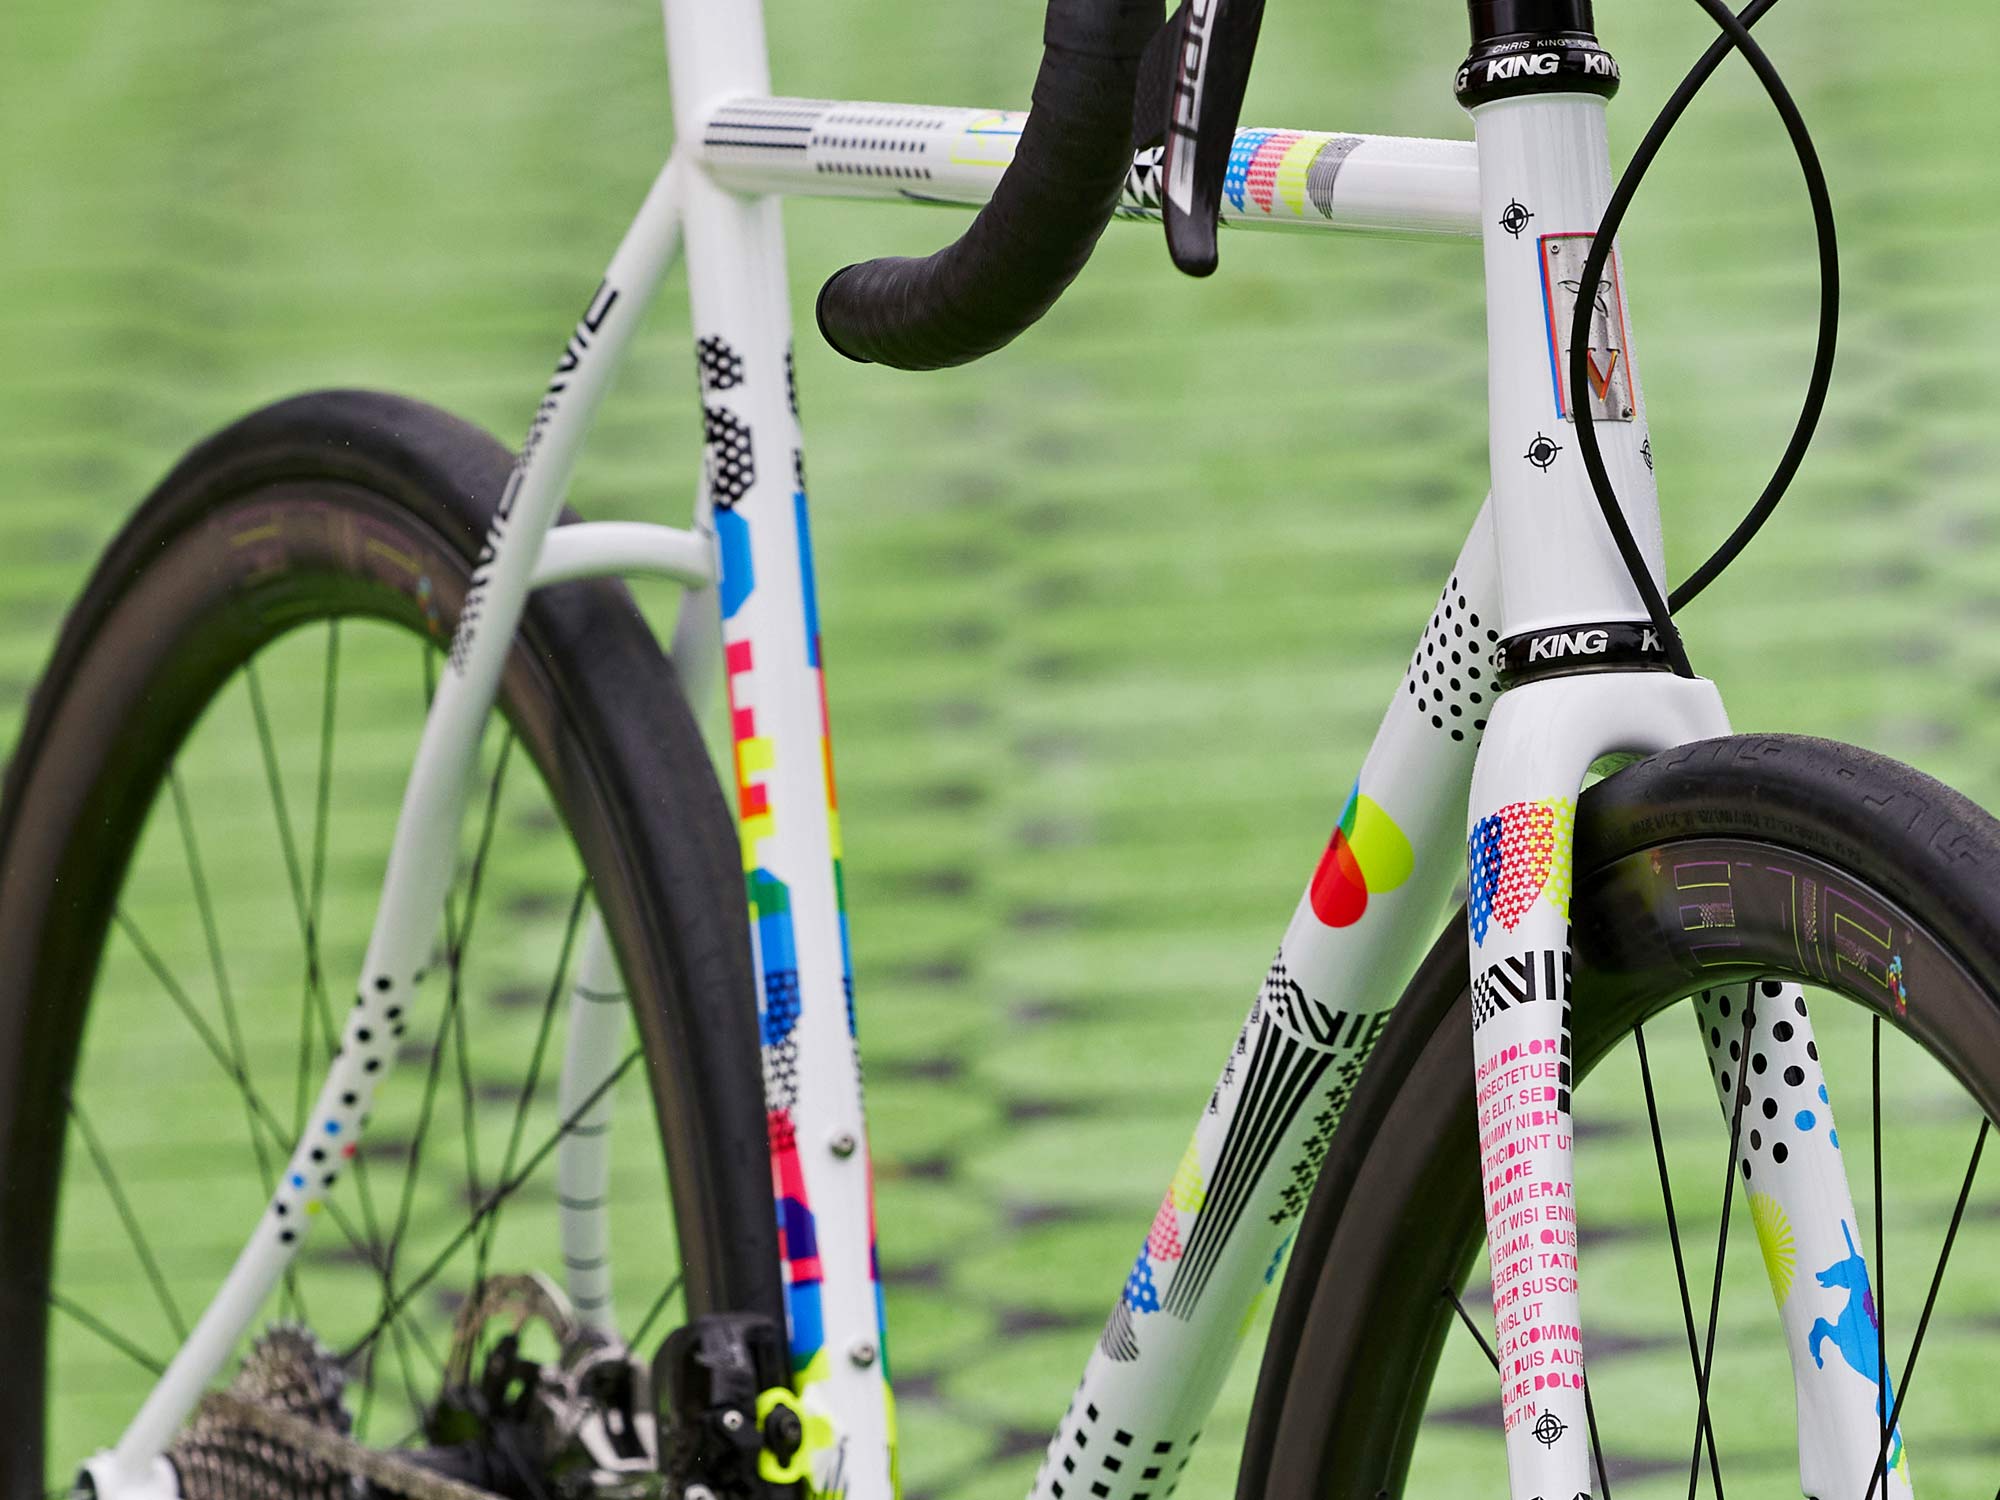 2021-2022 Speedvagen Surprise Me series, full-custom Vanilla workshop road bike with meticulous surprise paintjob inspired by printer's proofs, The Painters Proof CMYK edition